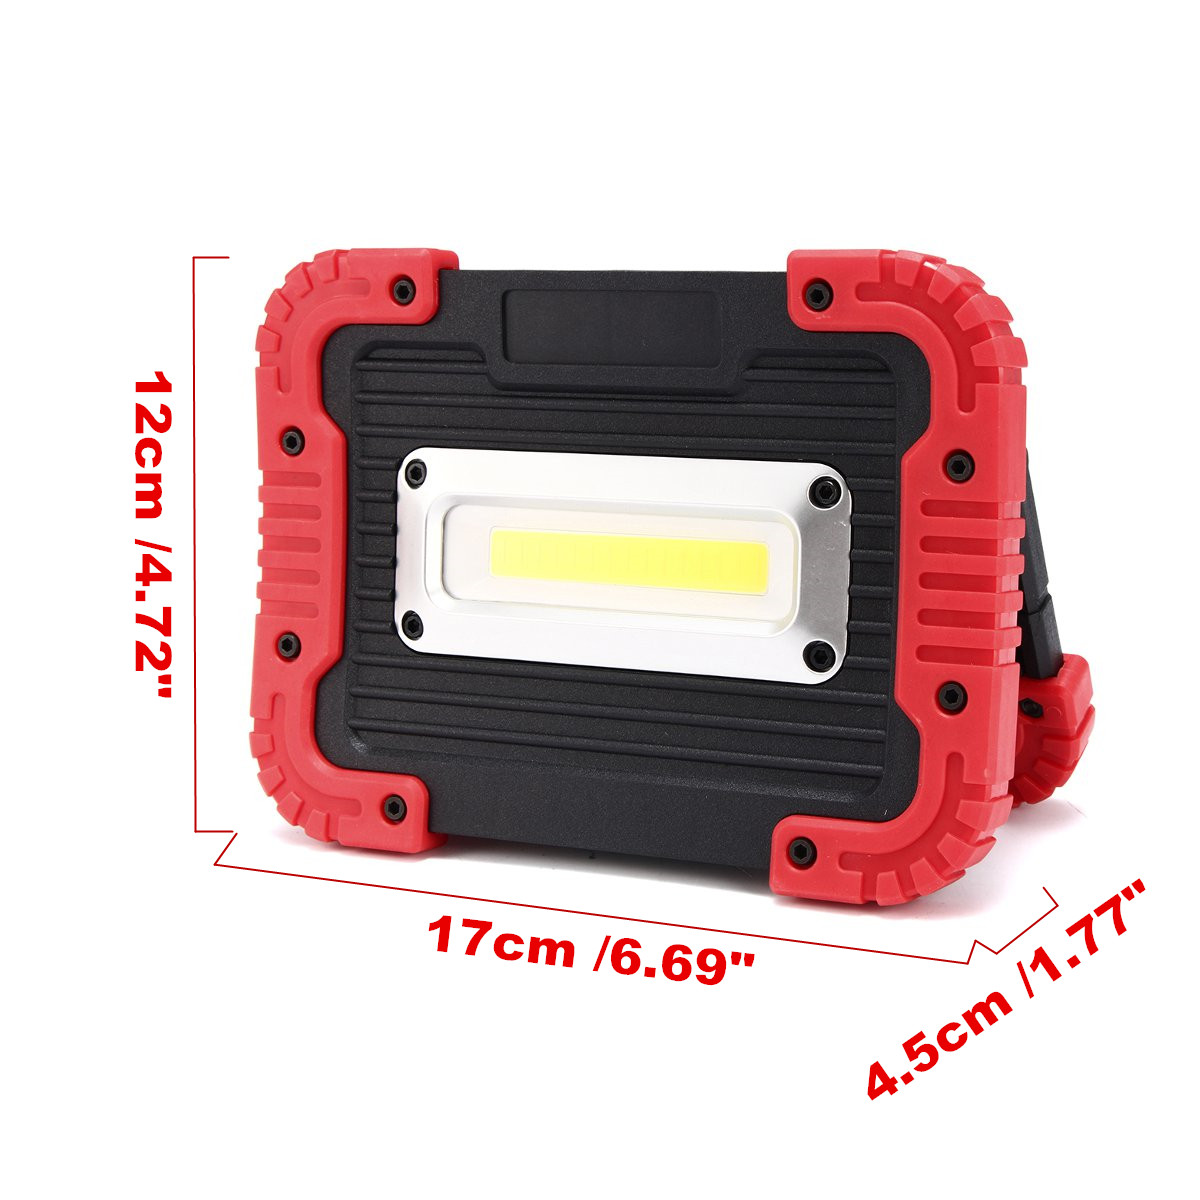 10W-750LM-Outdoor-Portable-COB-LED-Flood-Work-Light-USB-Rechargeable-Camping-Tent-Lantern-1402812